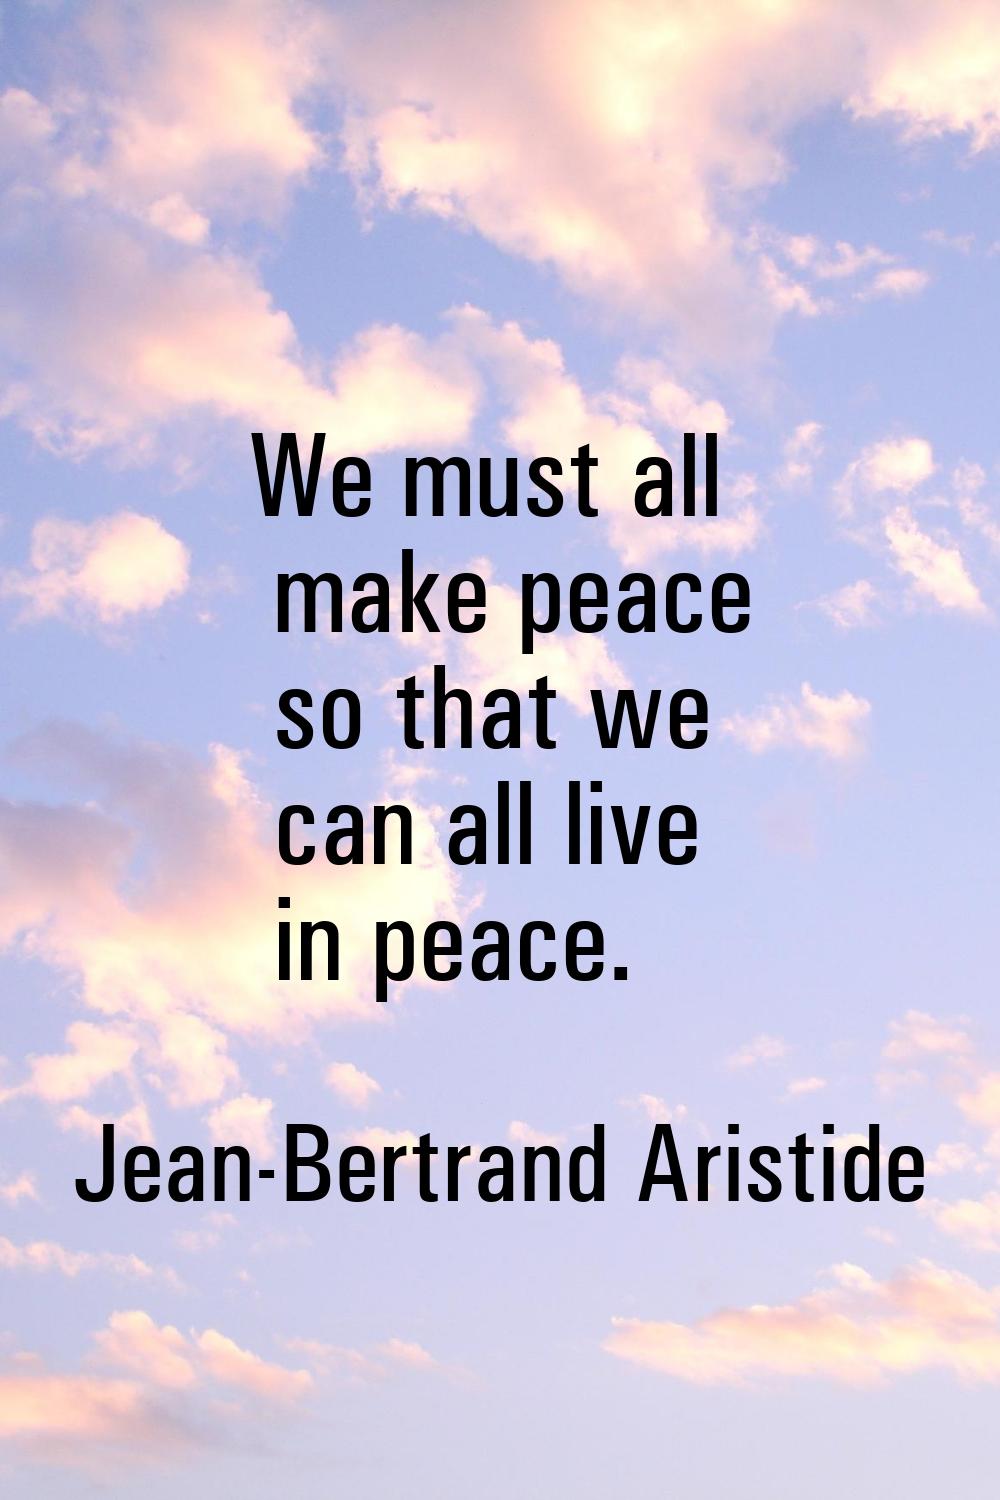 We must all make peace so that we can all live in peace.